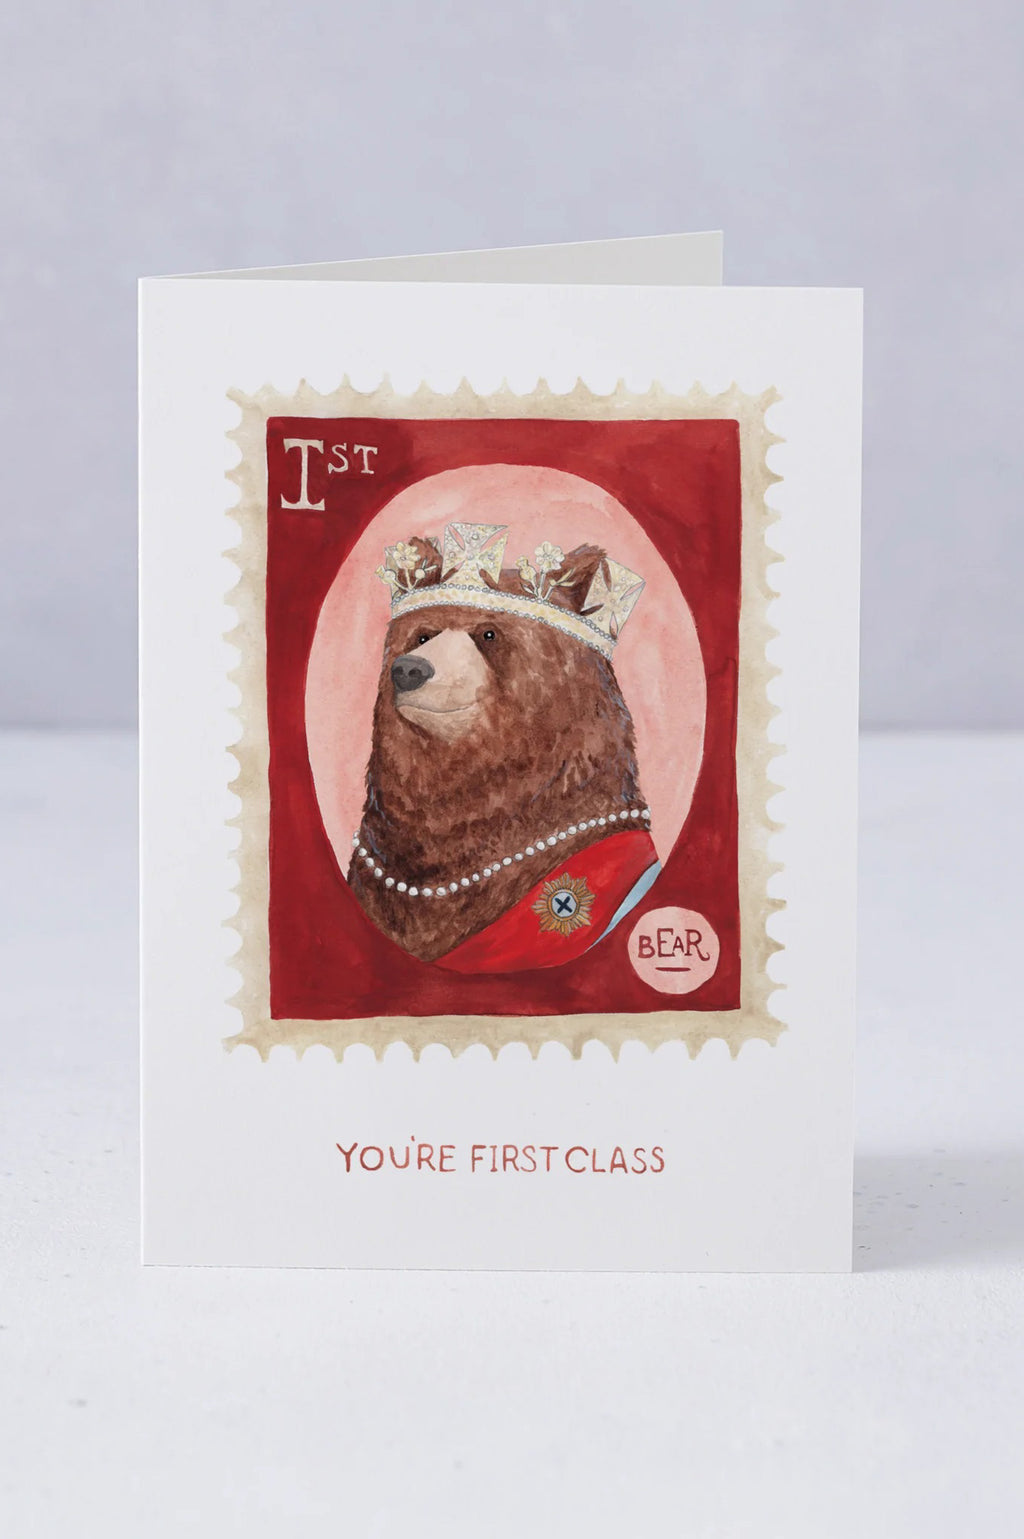 SS22 Mister Peebles First Class Card - The Mercantile London